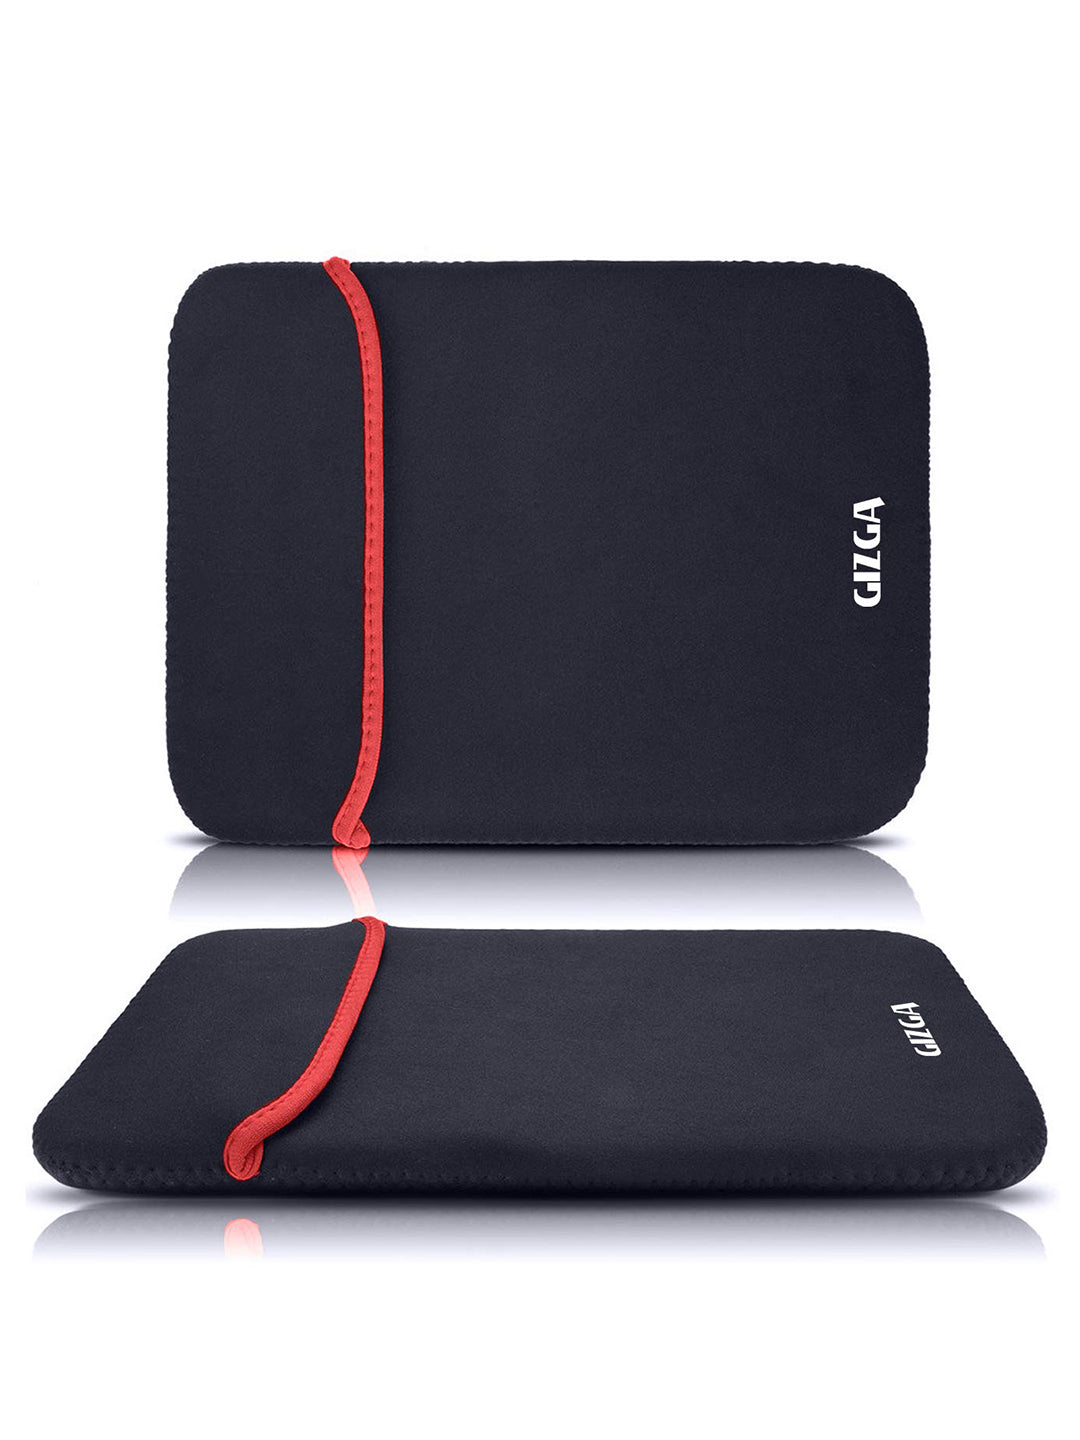 Gizga Essentials GE-RLV-14-BLK-RED Laptop Sleeve/Cover